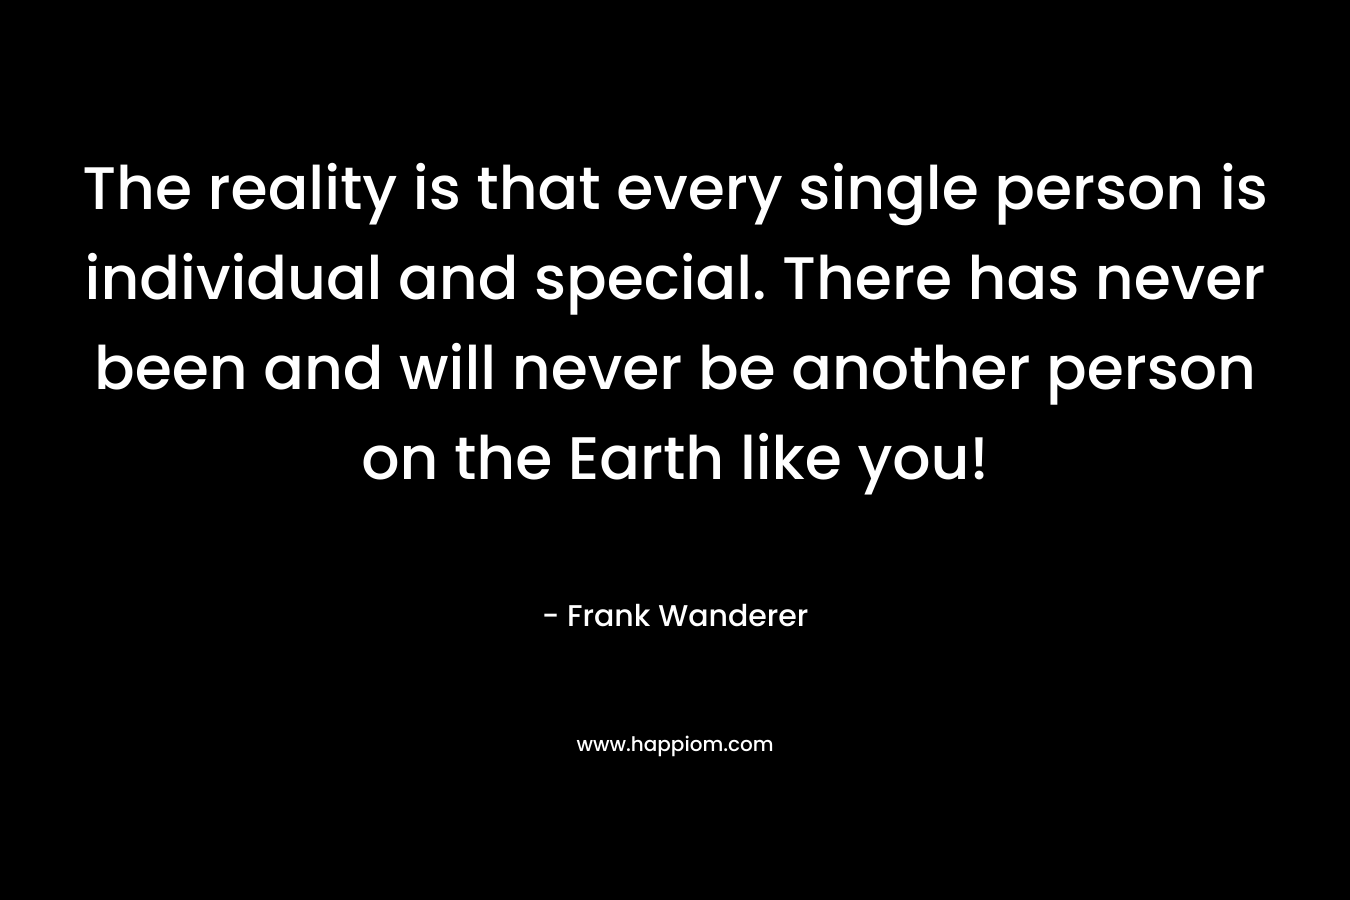 The reality is that every single person is individual and special. There has never been and will never be another person on the Earth like you! – Frank Wanderer